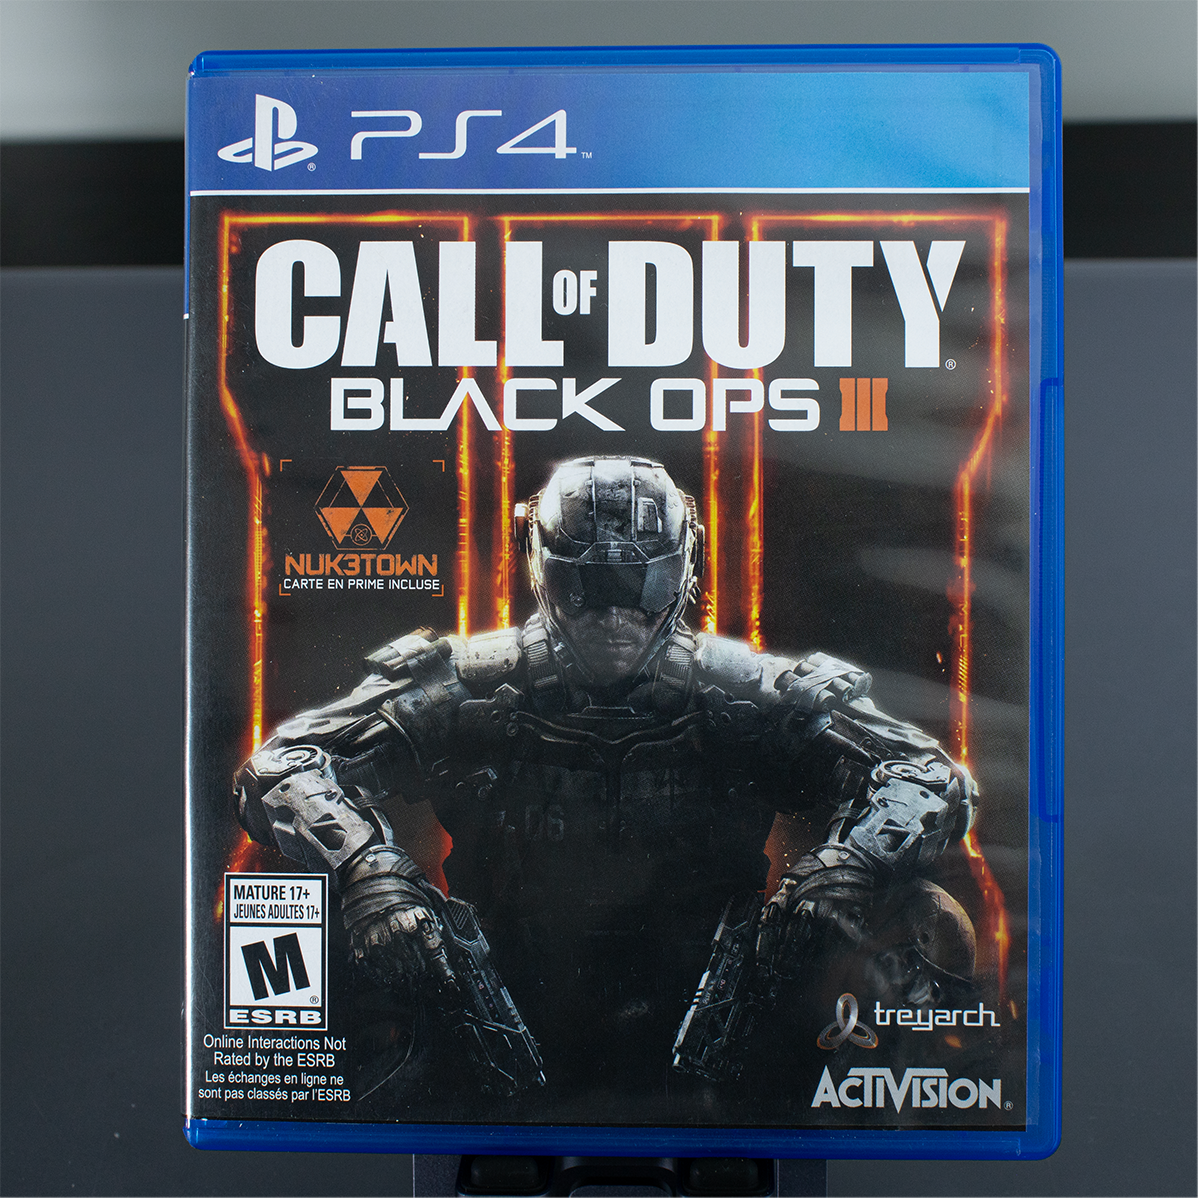 Call of Duty Black Ops III - PS4 Game